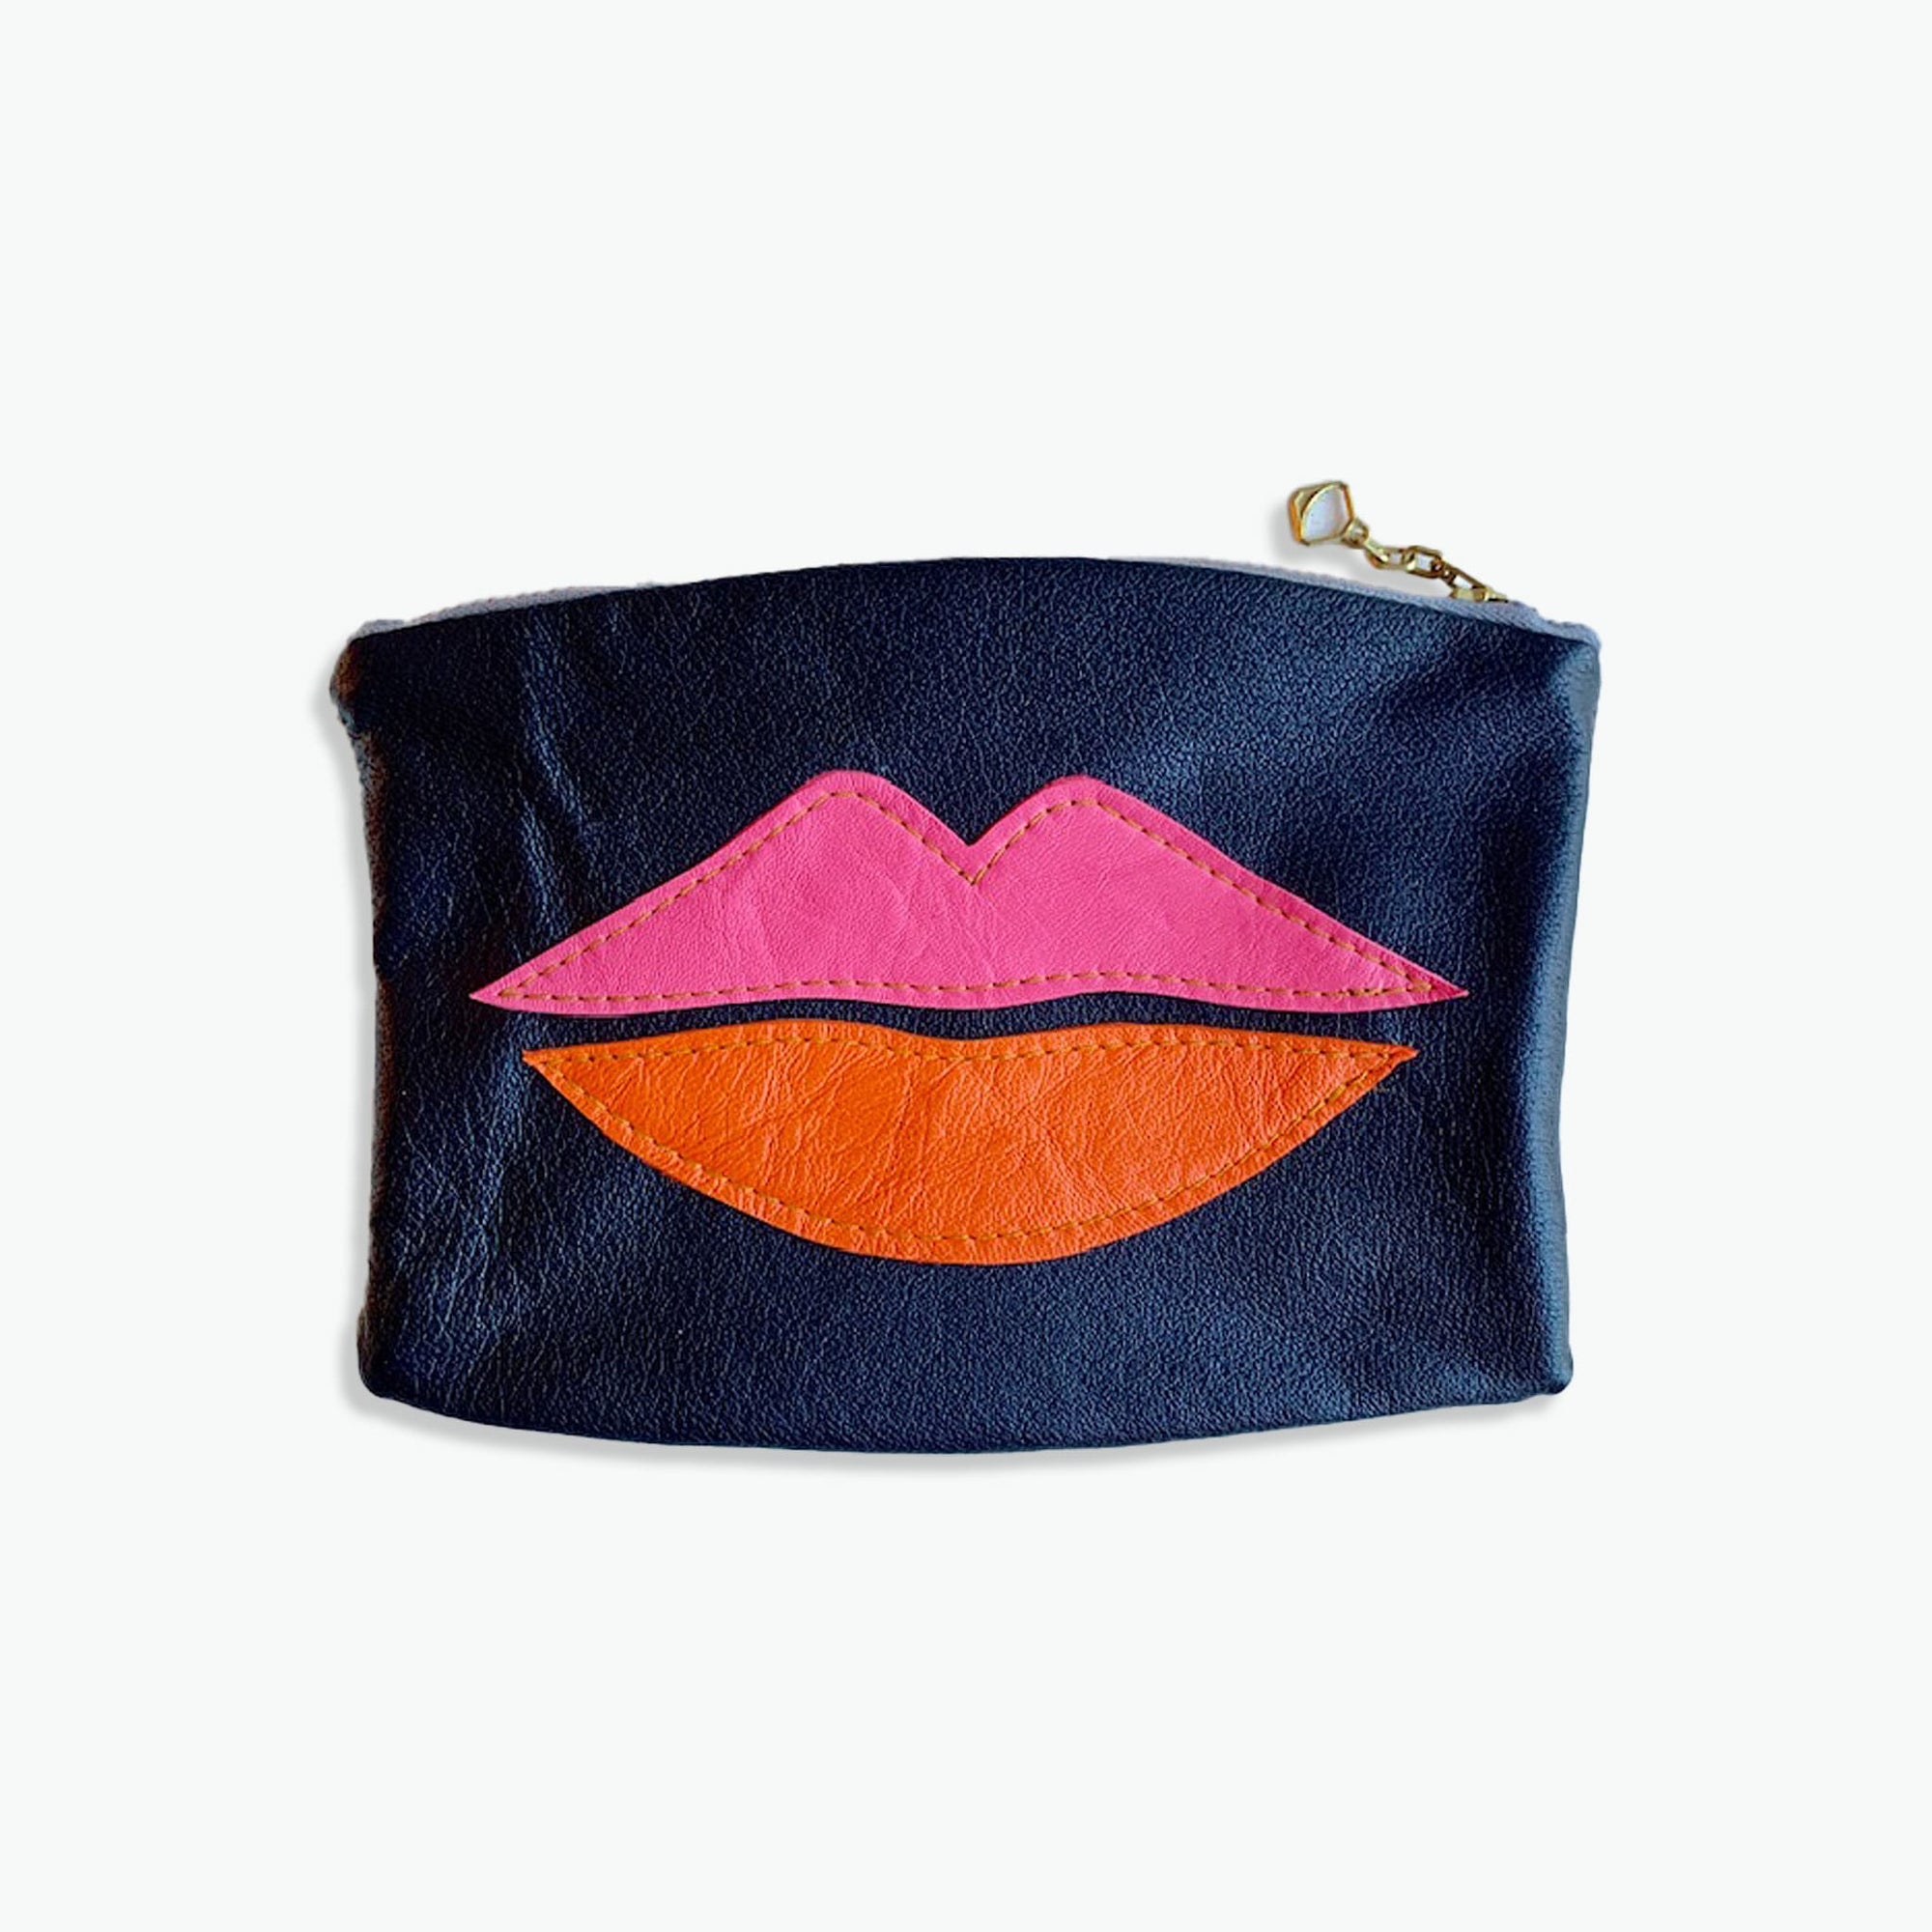 Upcycled Leather Lipstick Holder/coin Pouch With Leather 